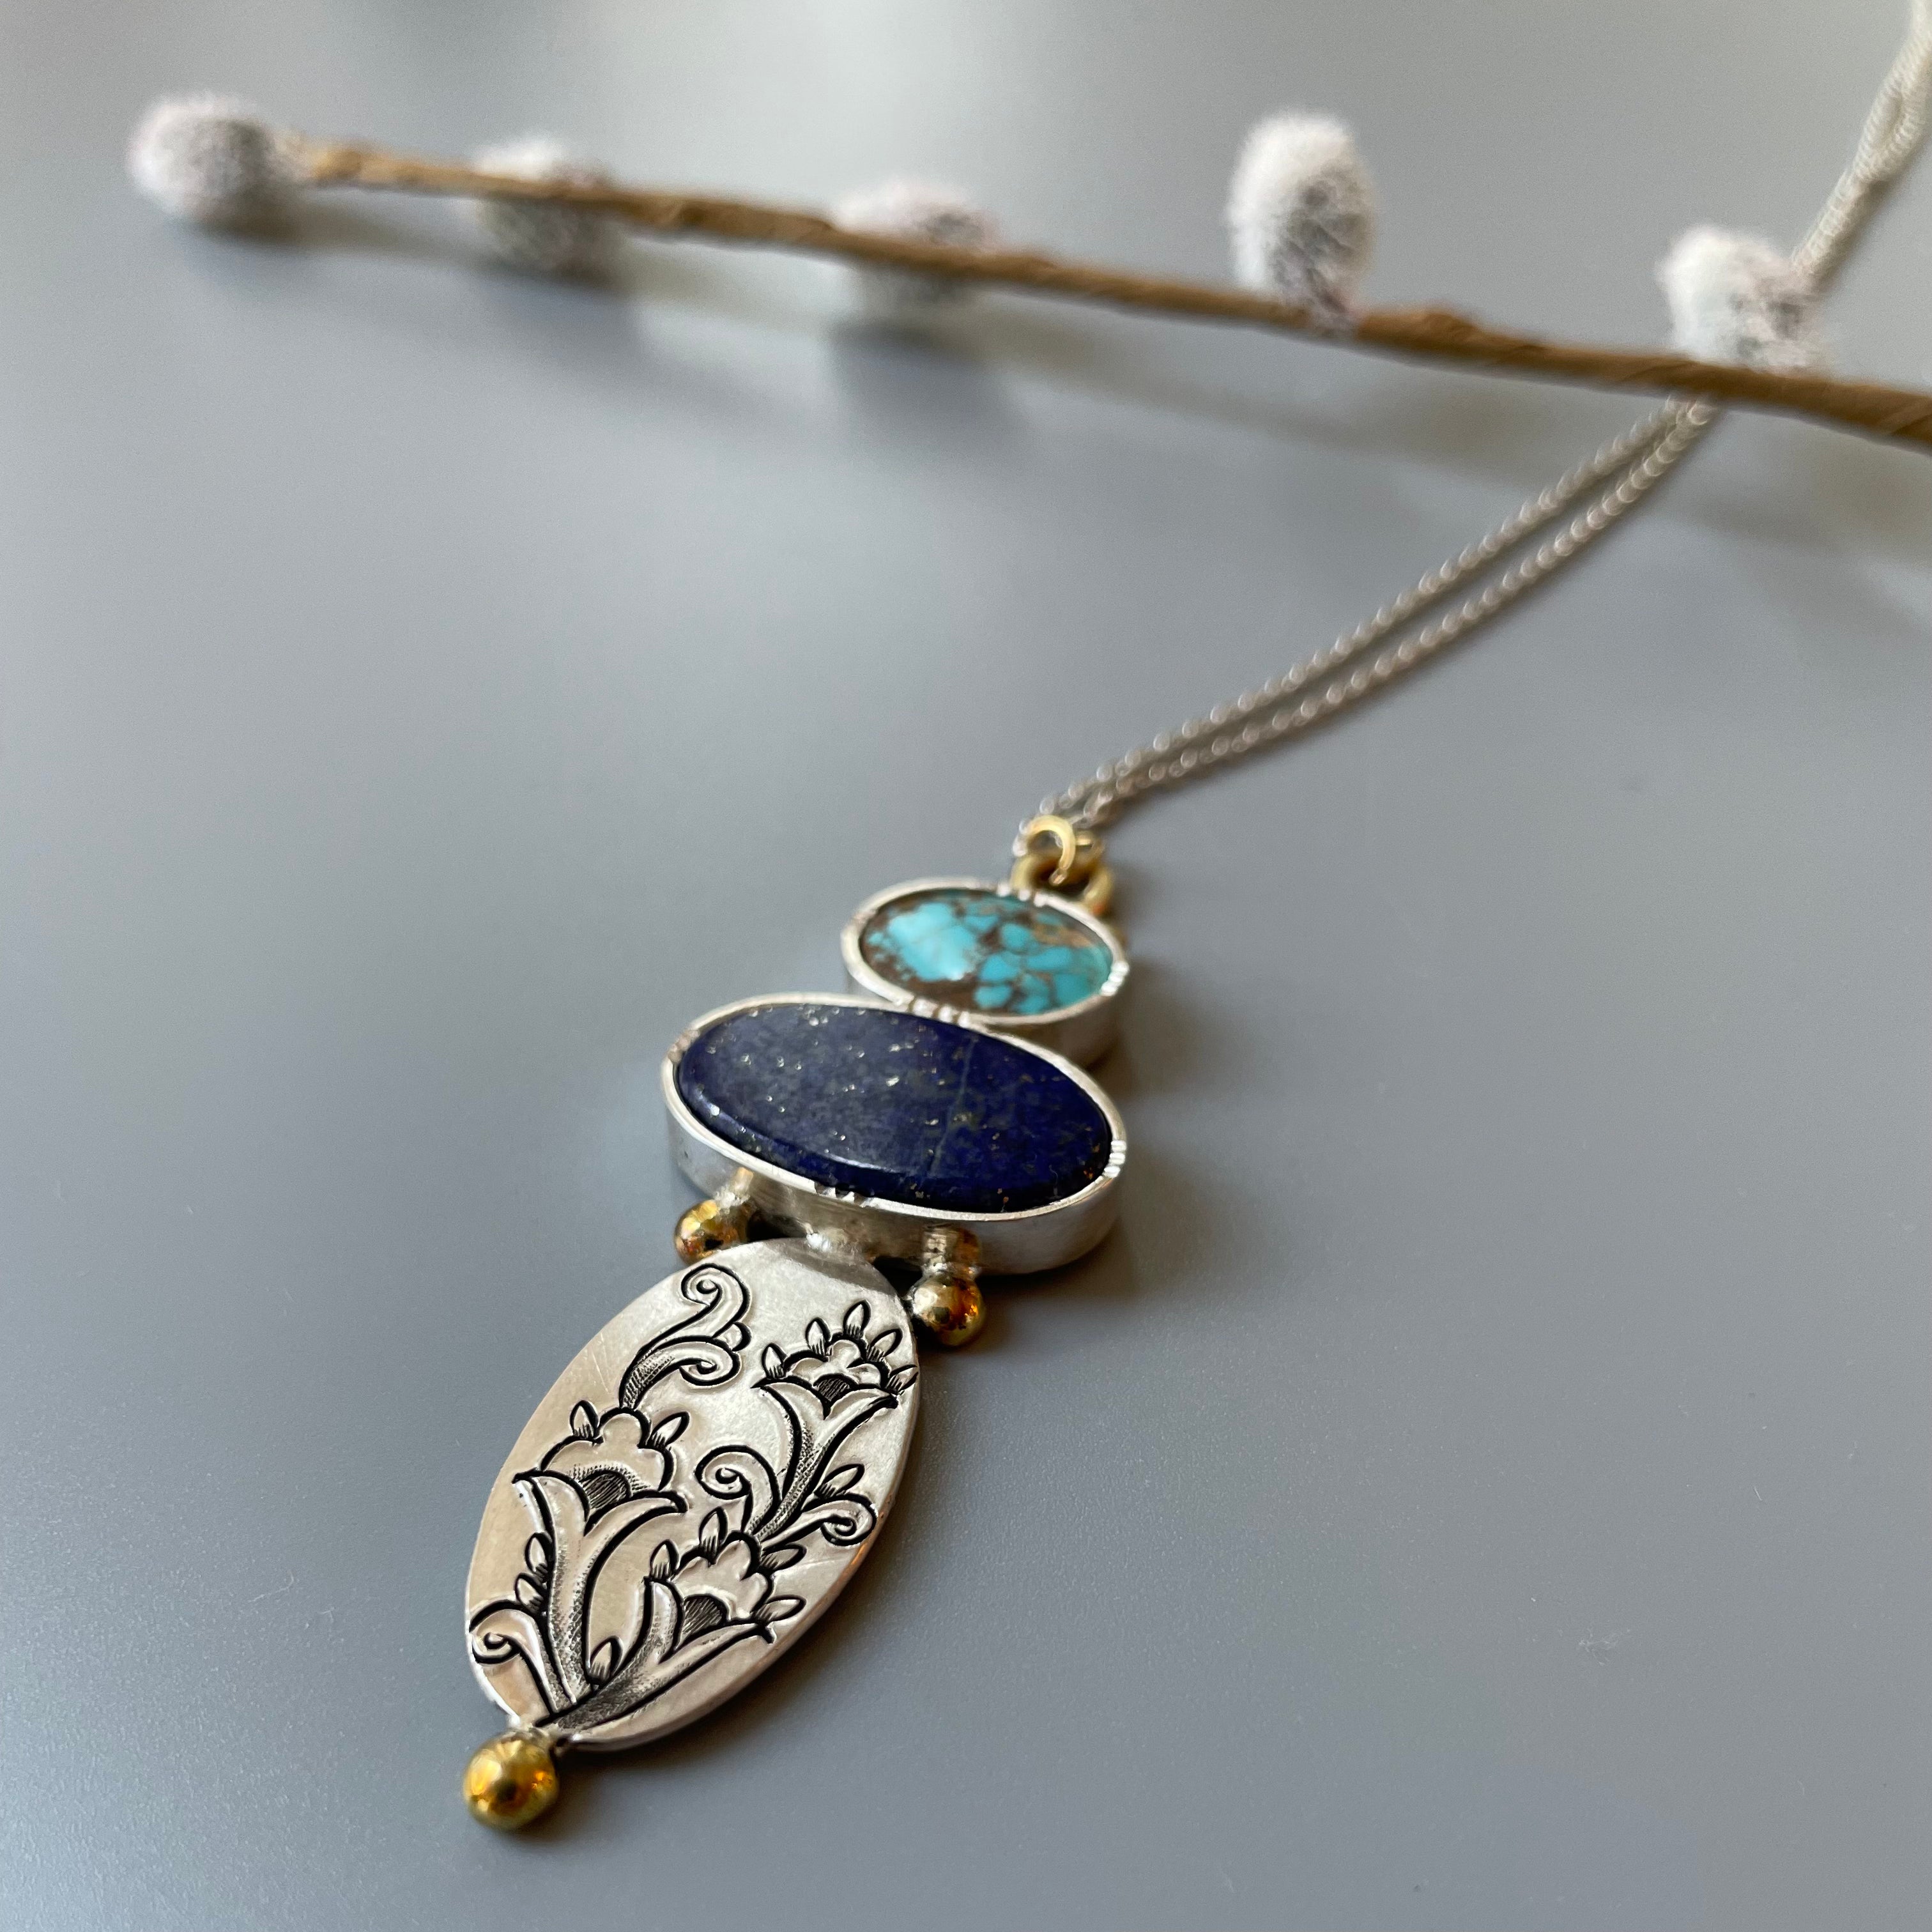 Persian Turquoise Jewelry-Handmade Silver Necklace with Persian Engraving and Natural Gemstone: Persian Jewelry-AFRA ART GALLERY